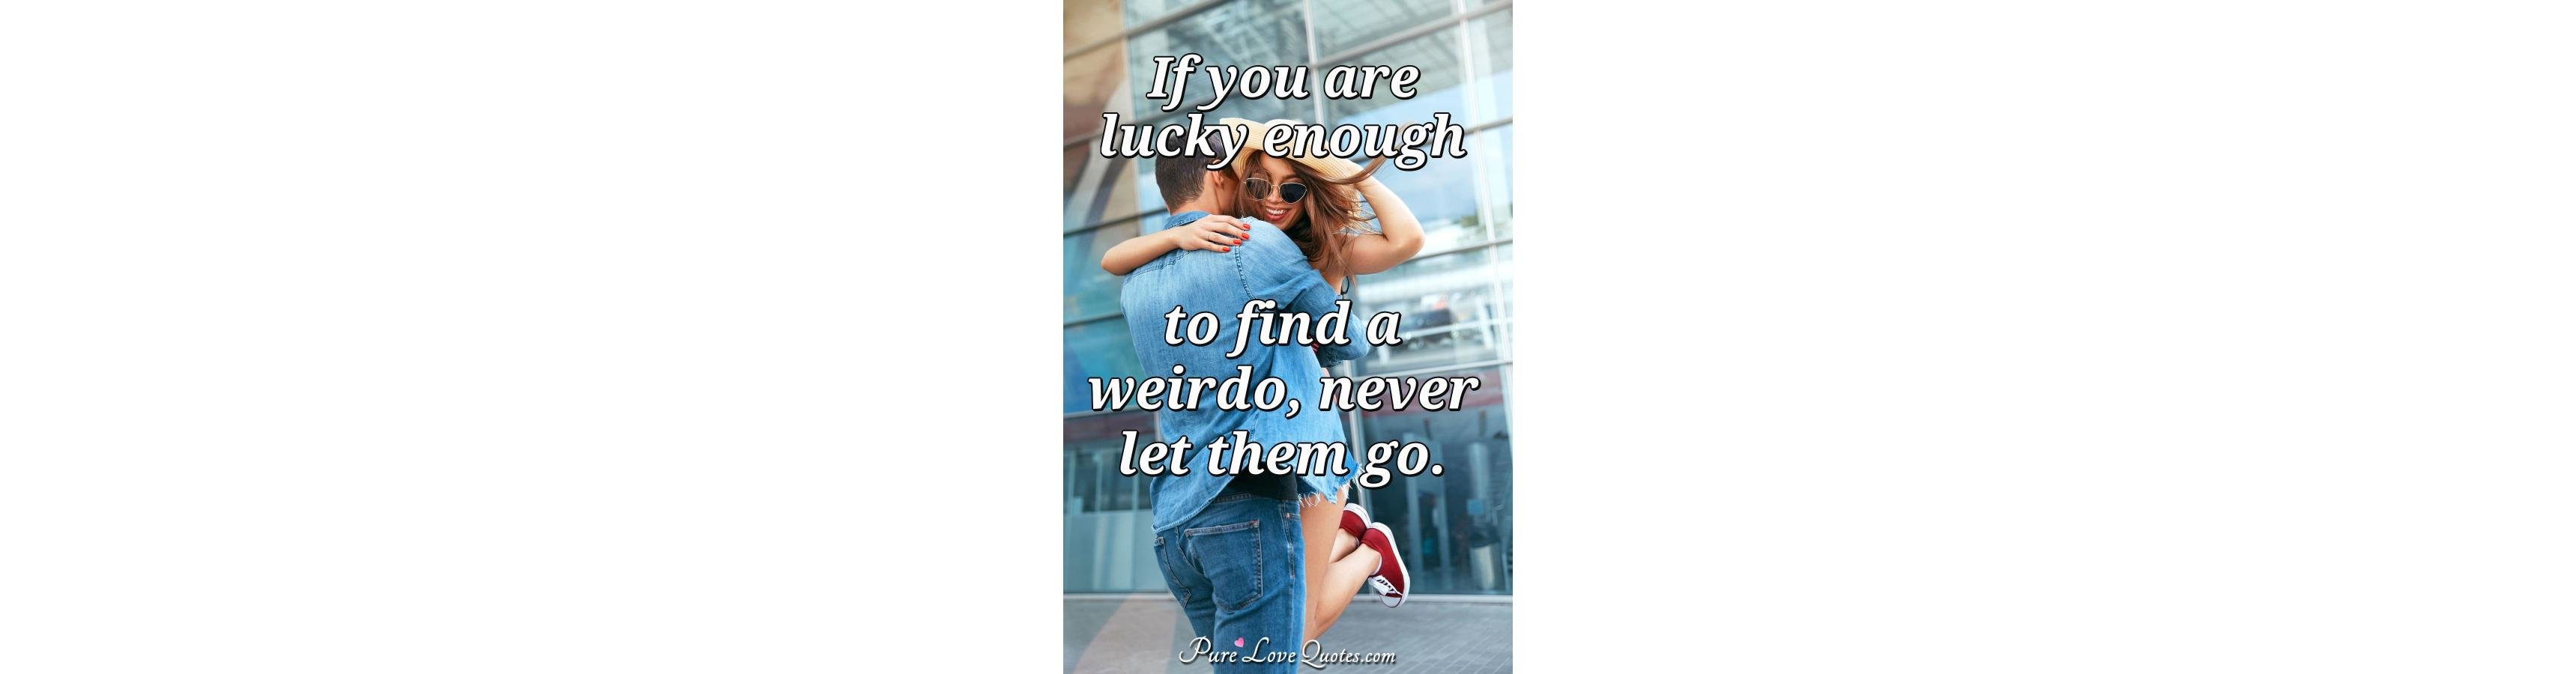 If you are lucky enough to find a weirdo, never let them 